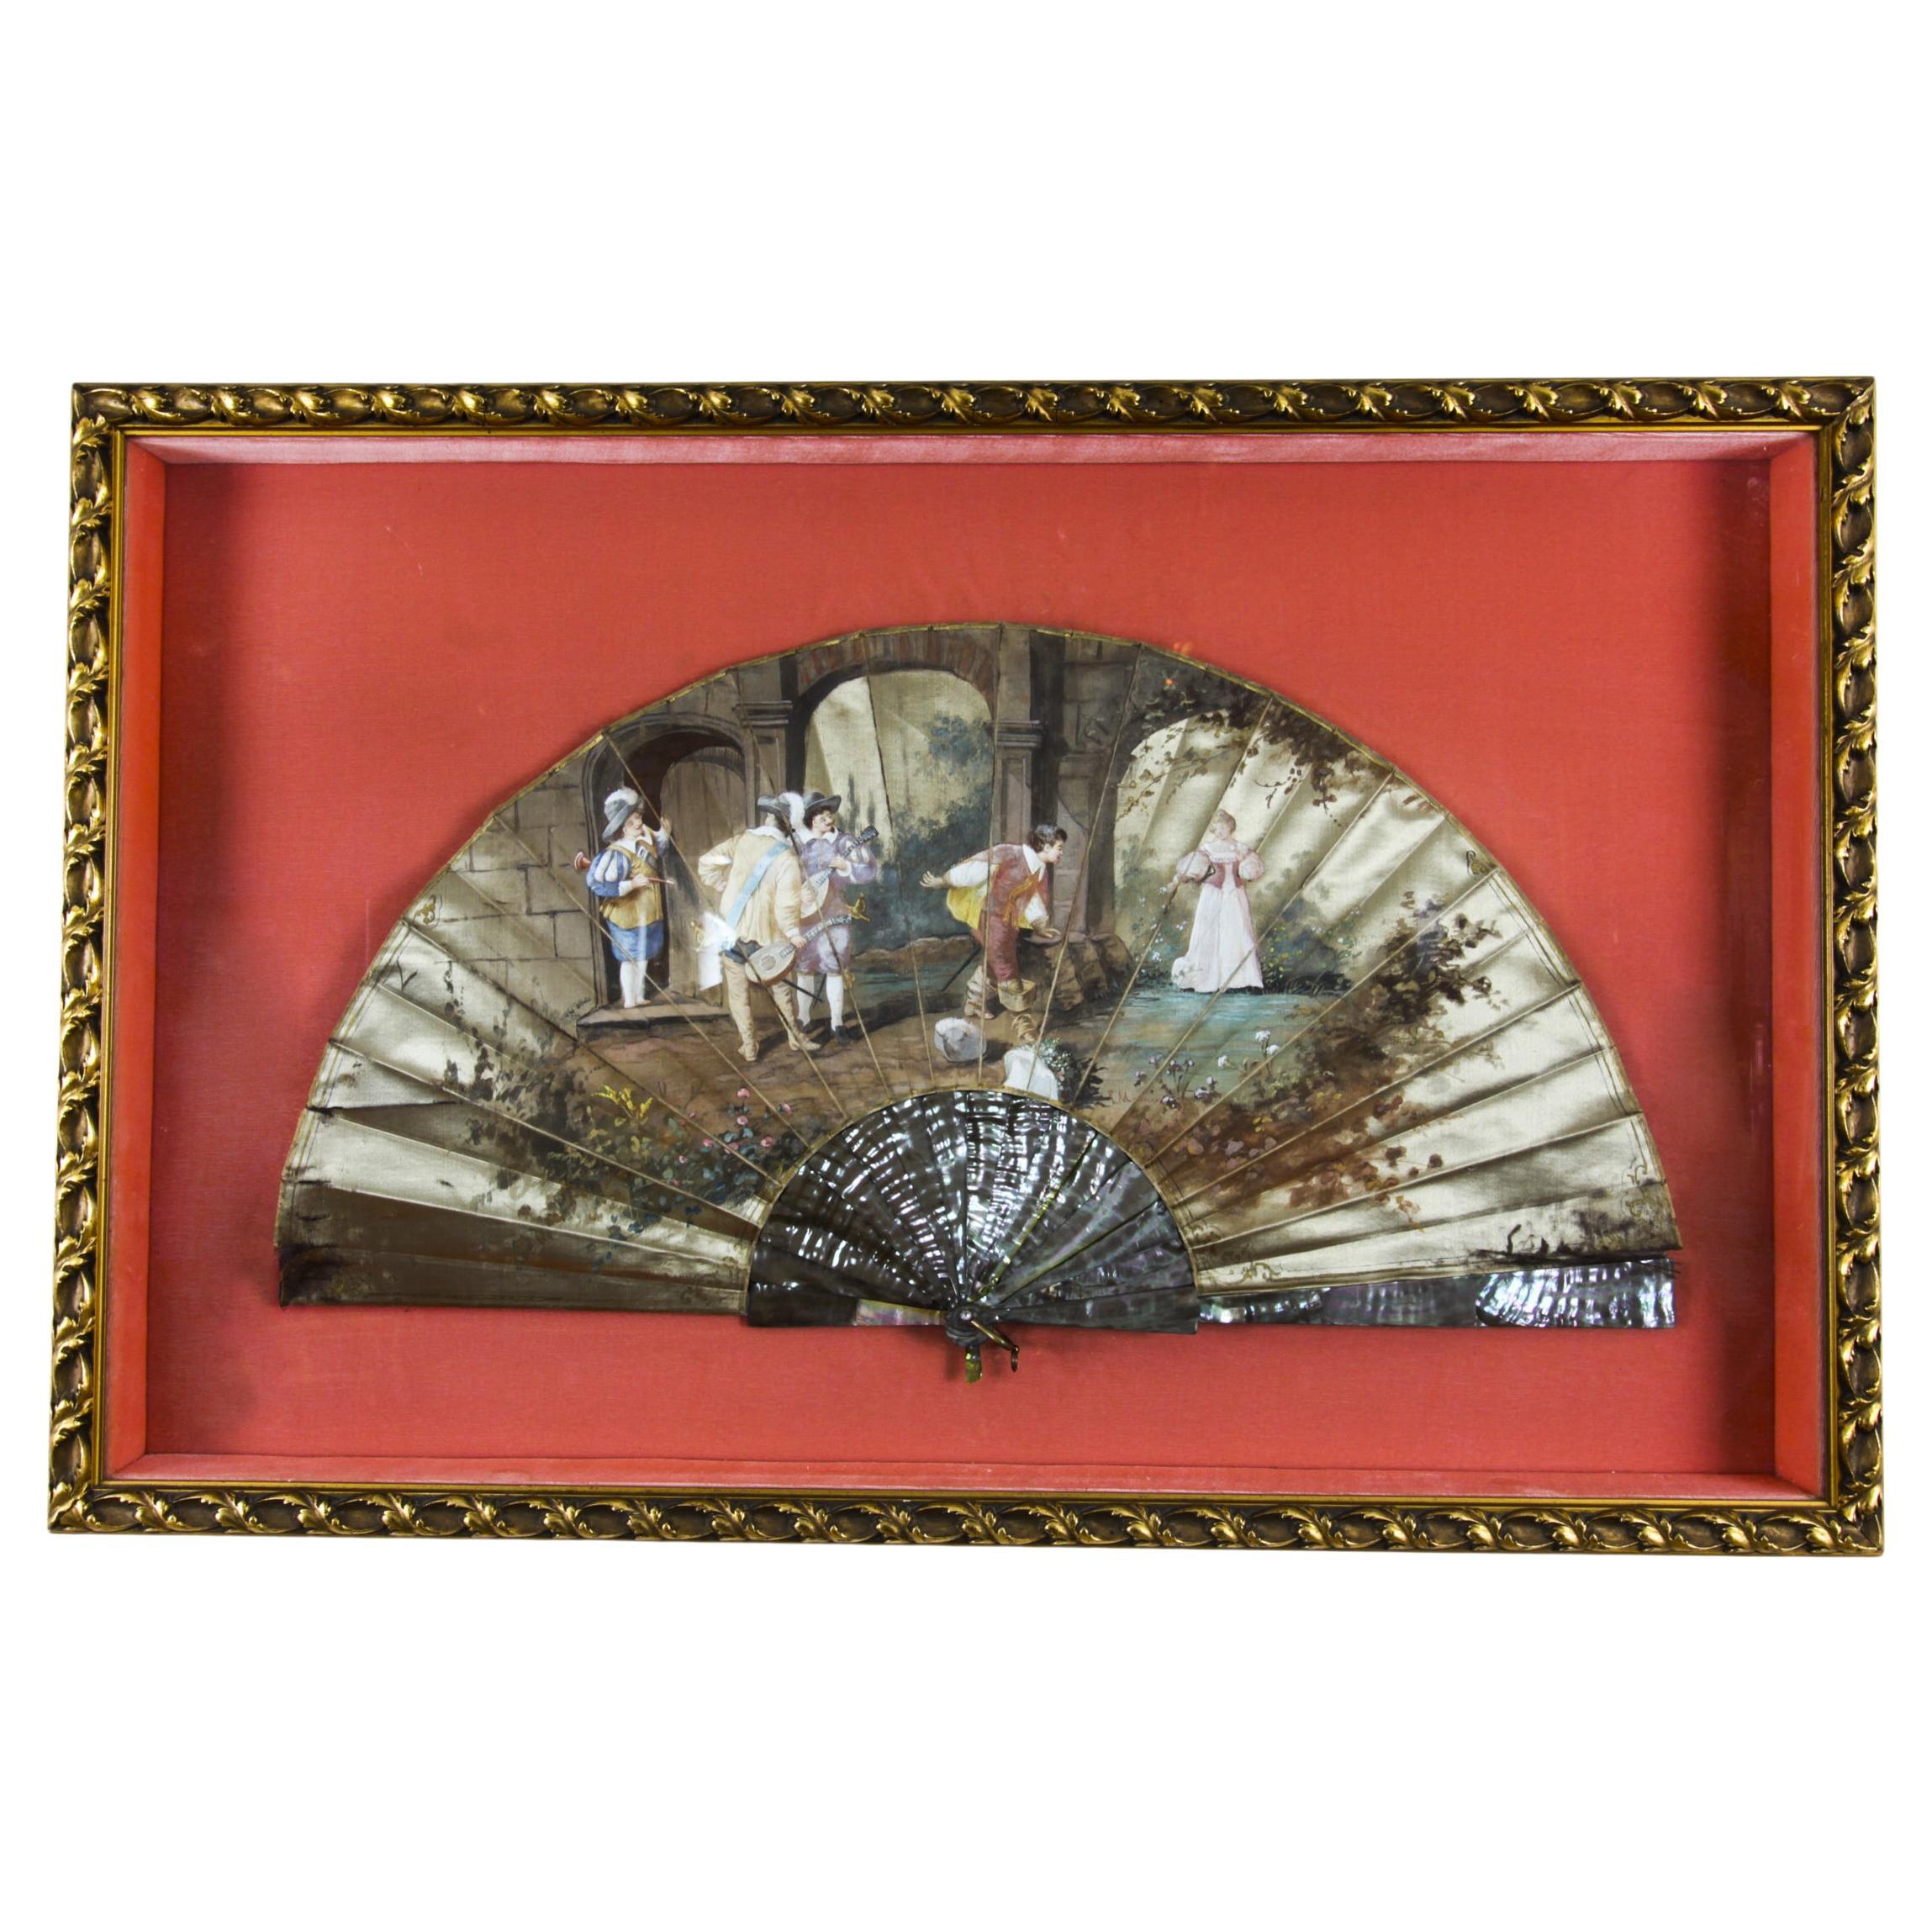 Antique French Framed Hand-Painted Fan Late 18th Century